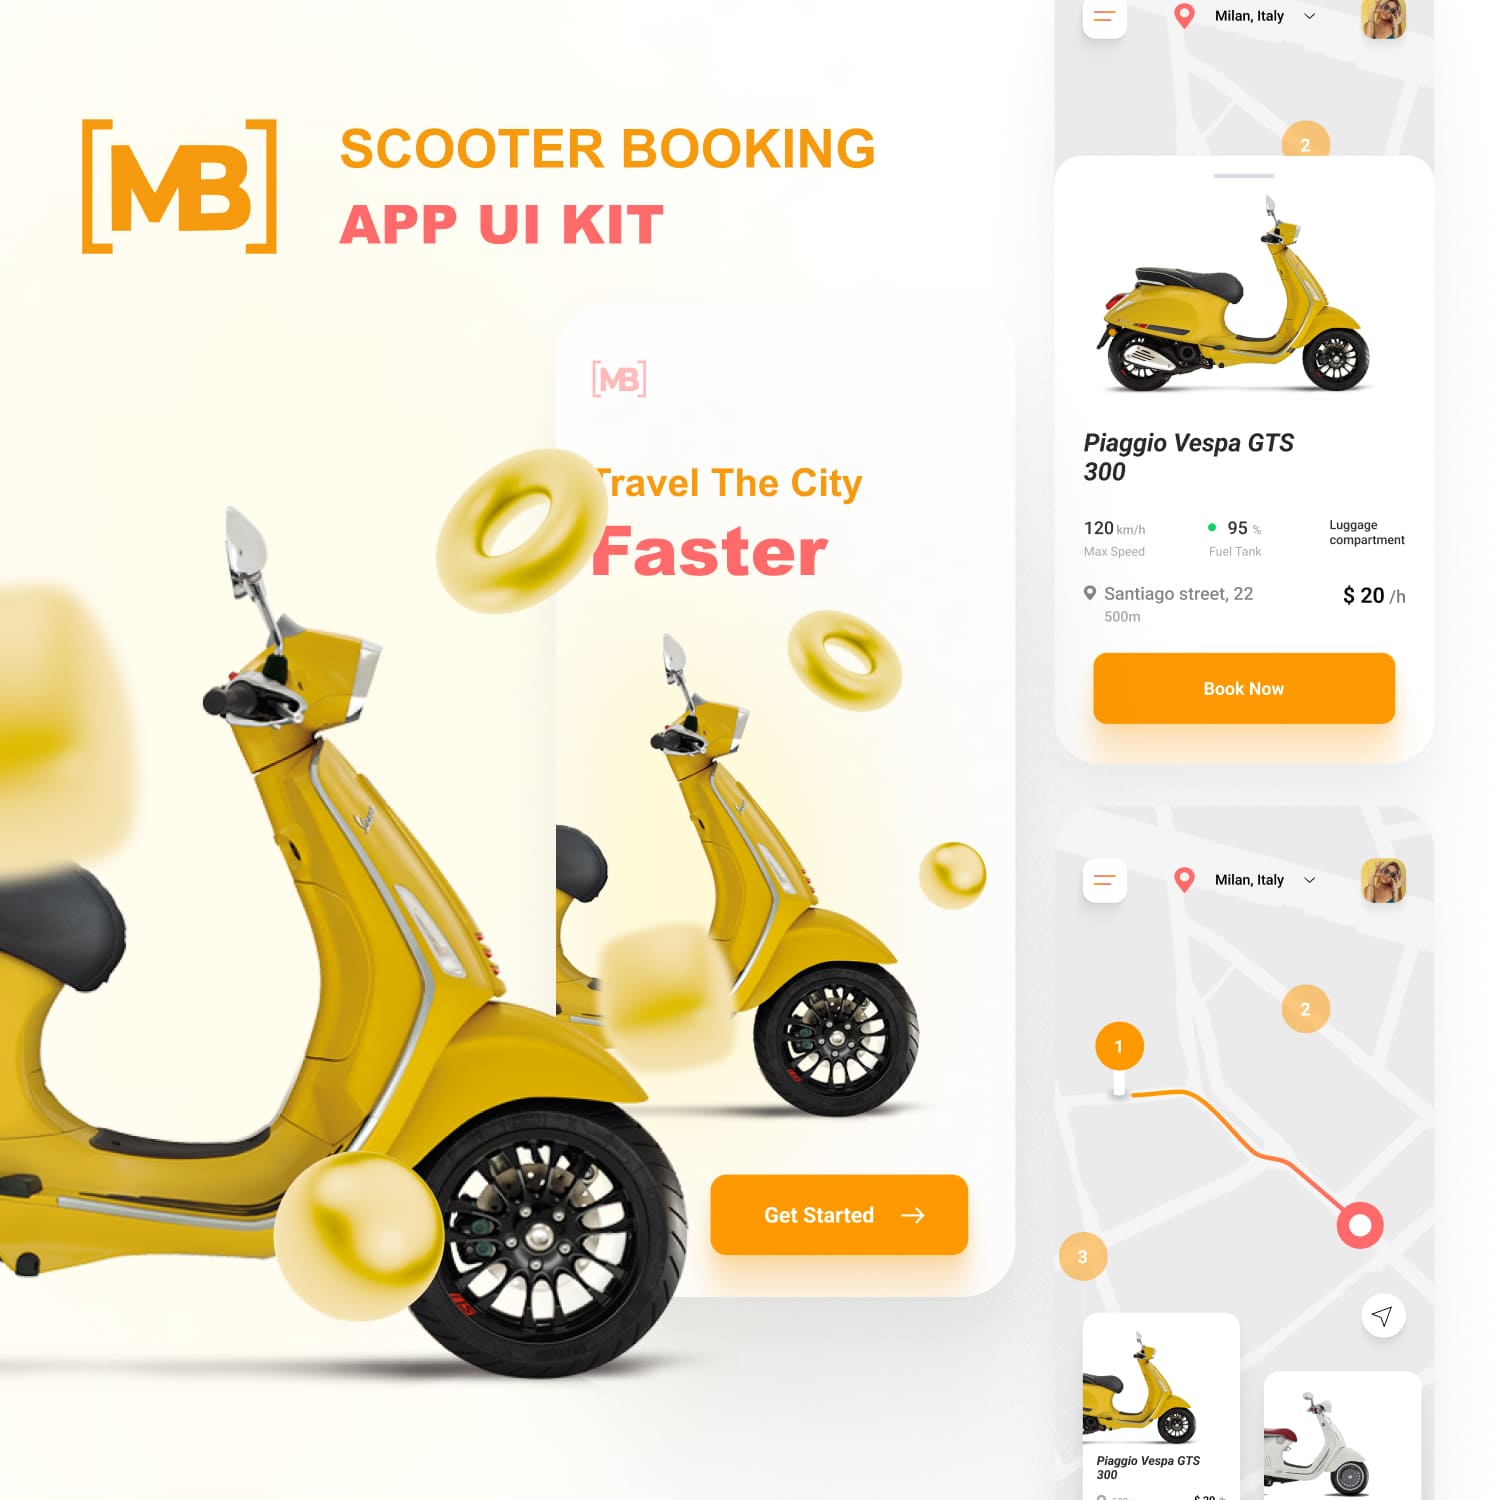 Scooter booking app.